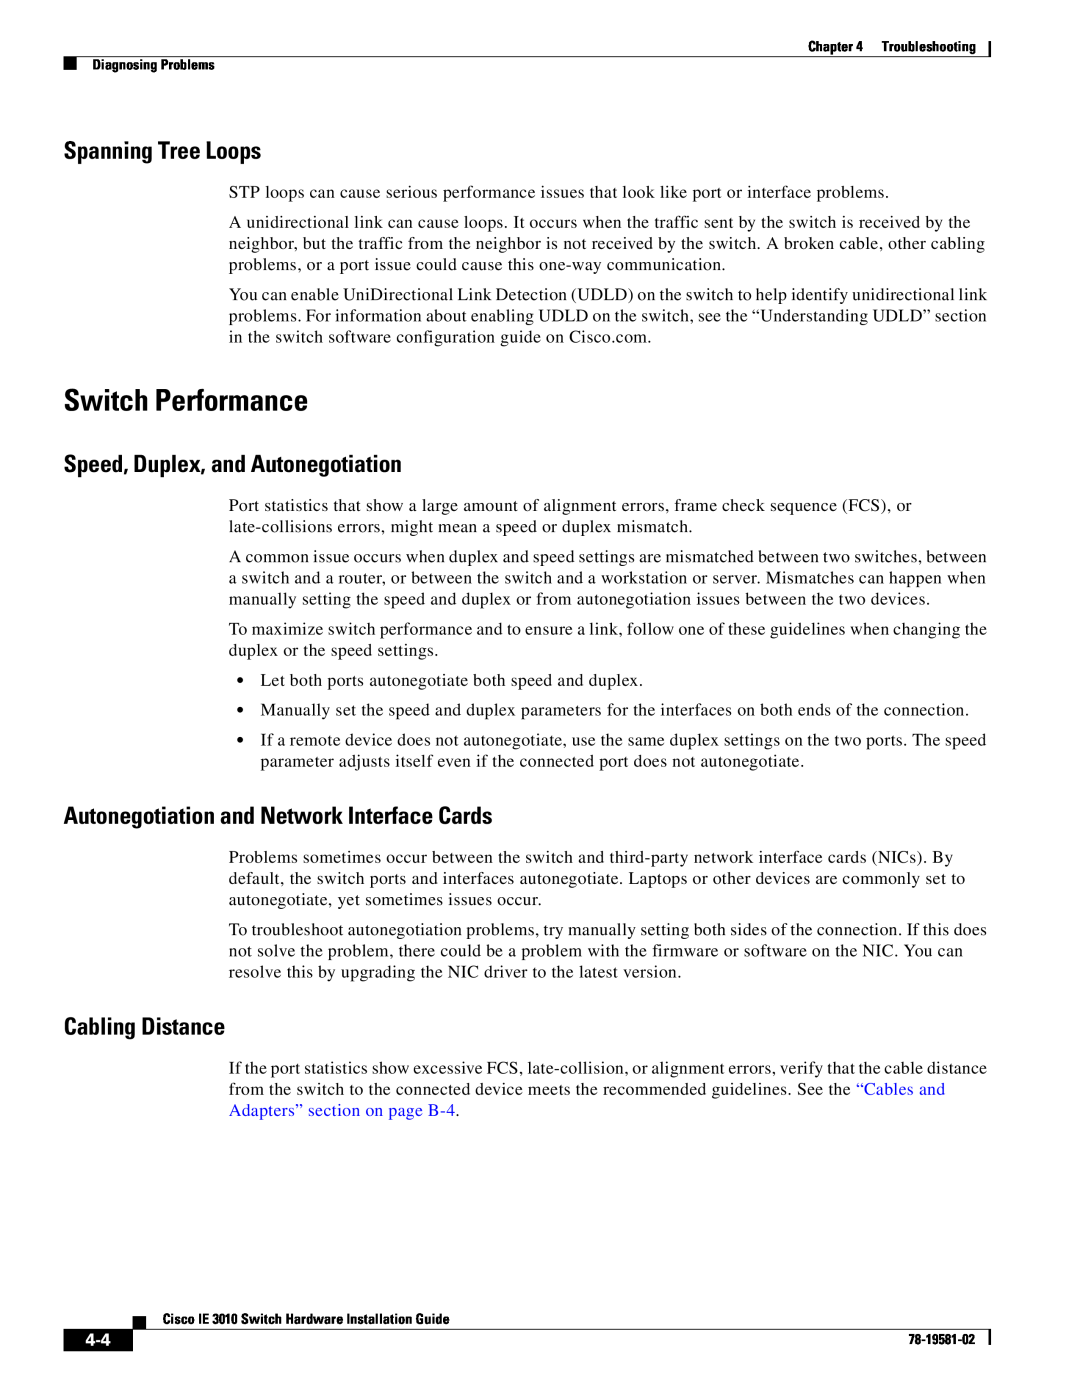 Cisco Systems IE3010 Switch Performance, Spanning Tree Loops, Speed, Duplex, and Autonegotiation, Cabling Distance 